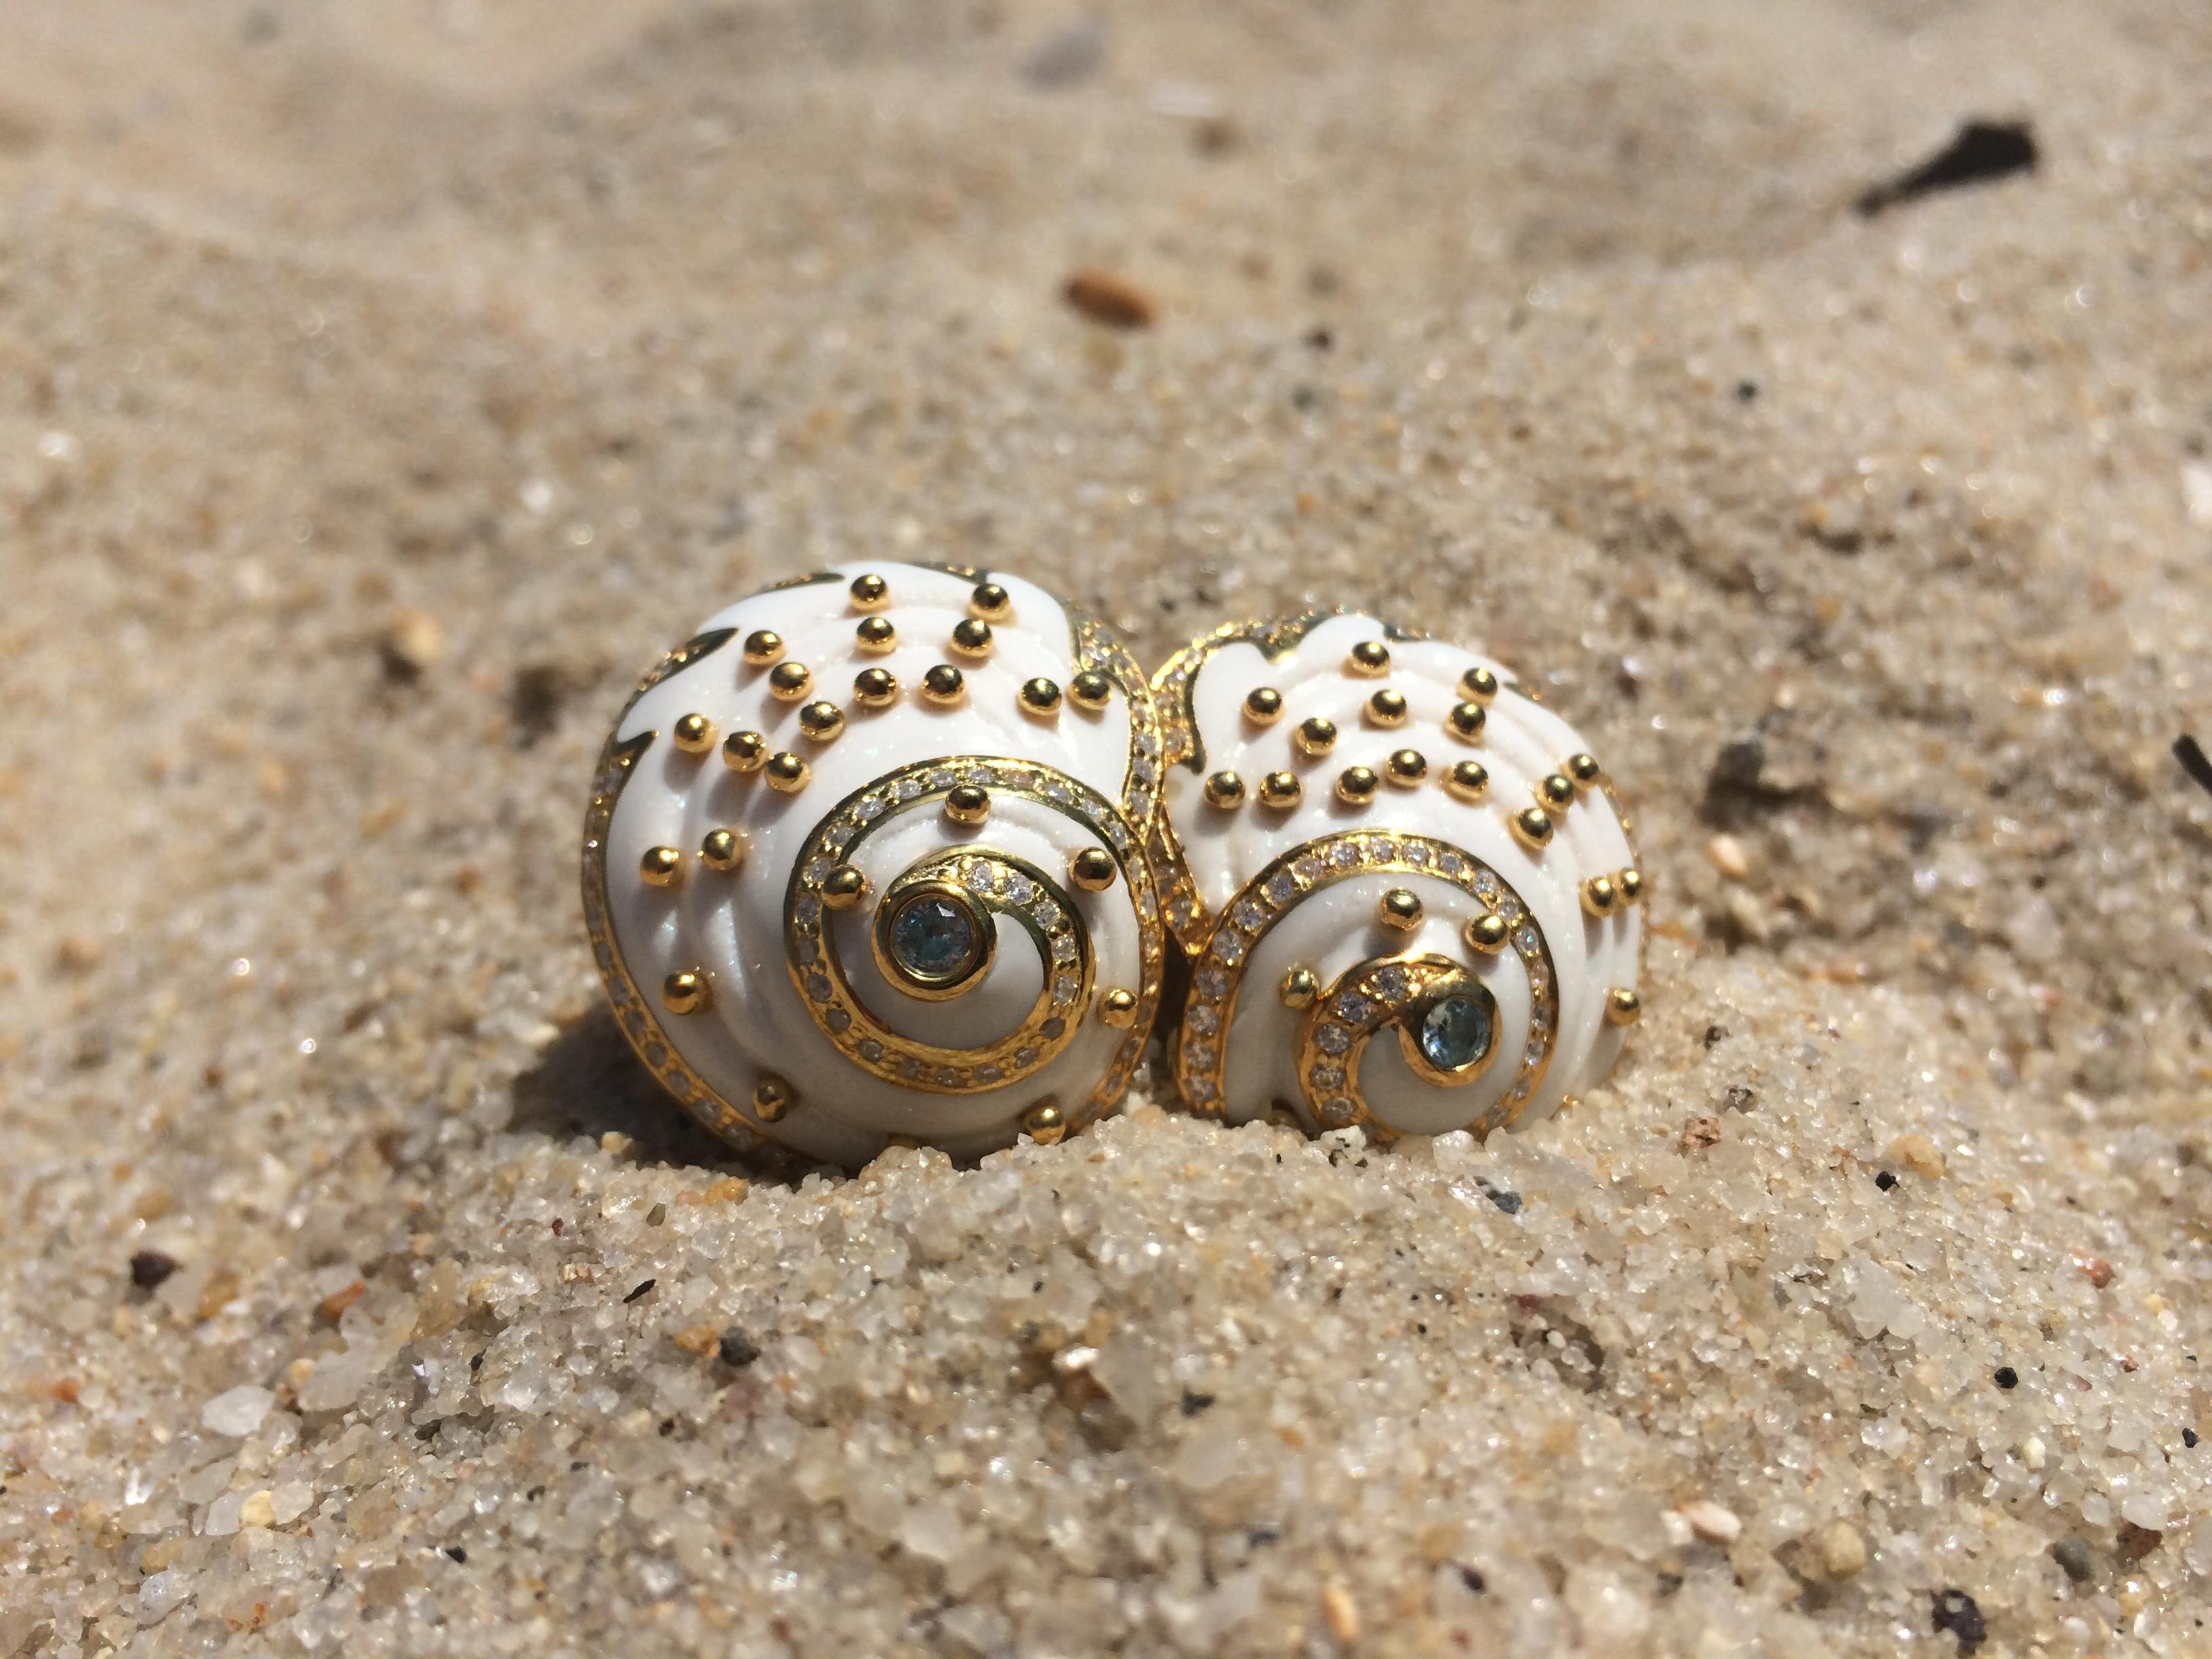 Seashell earrings by Miriam Salat.
Semi precious Starling Silver with Blue and White Topaz and Gold plating.
Mint green resin and golds studs. 
Signed 
Comes with a Miriam Salat pouch. 